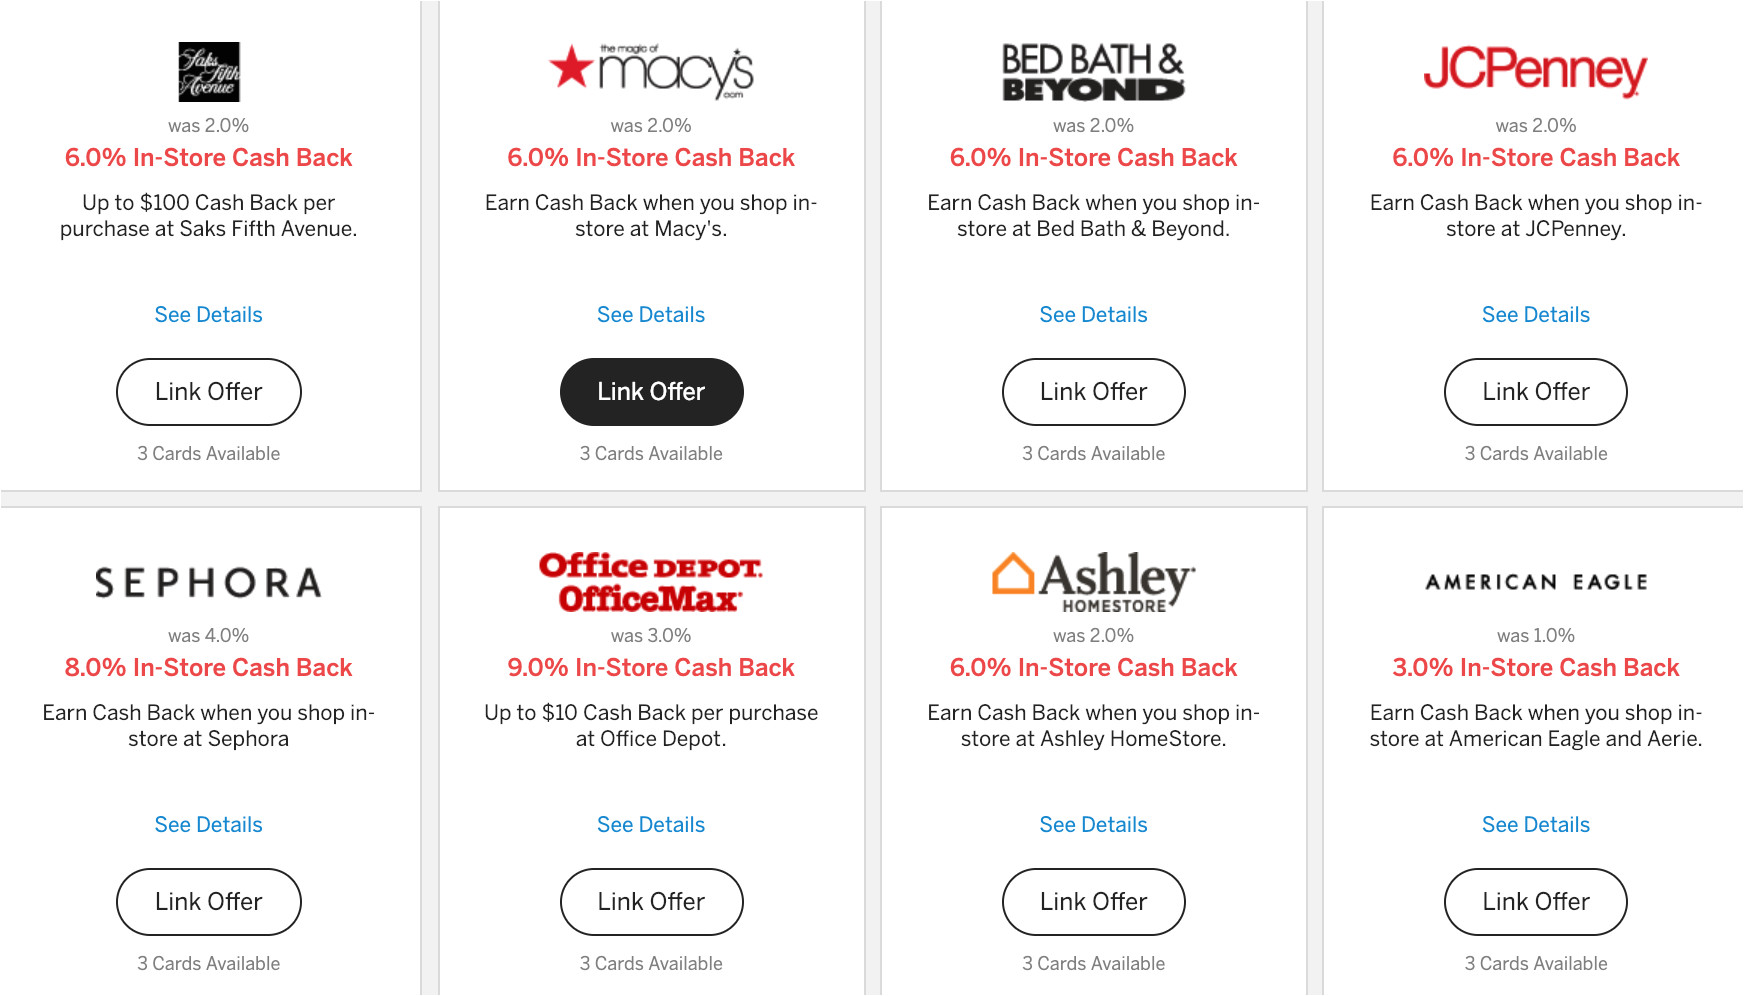 terrific program since typically there aren t many ways to earn from shopping portals in store only online using ebates or any other card link program